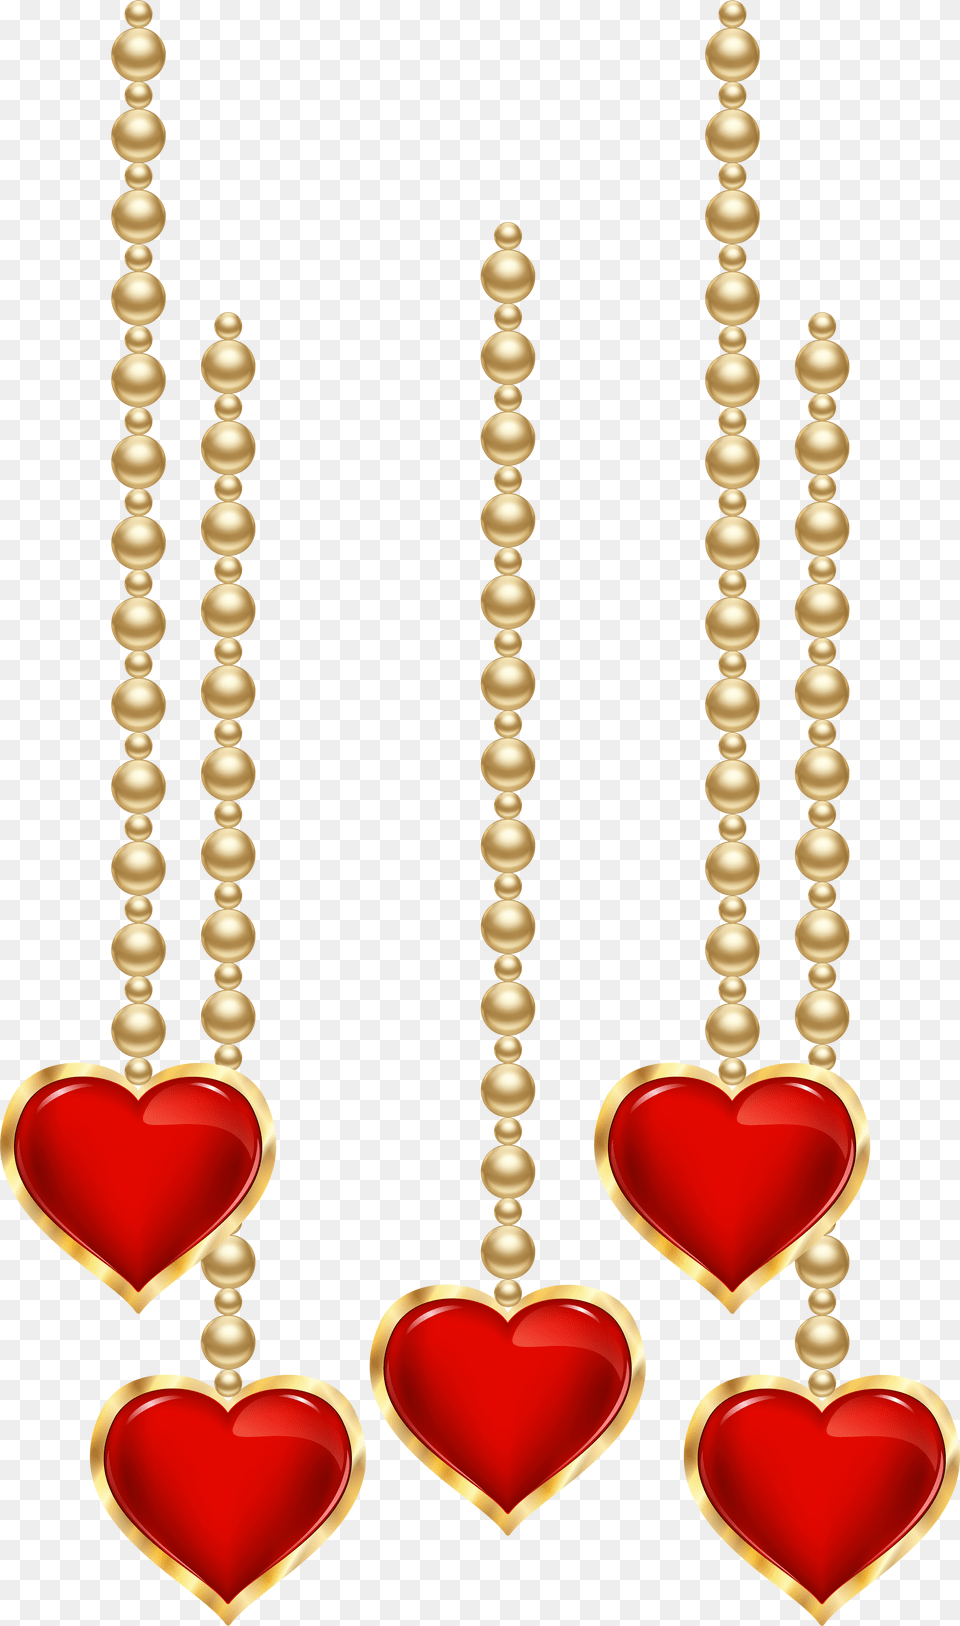 Hanging Decorative Hearts Clip Art Gallery Yopriceville Heart Hanging Clipart Free Png Download